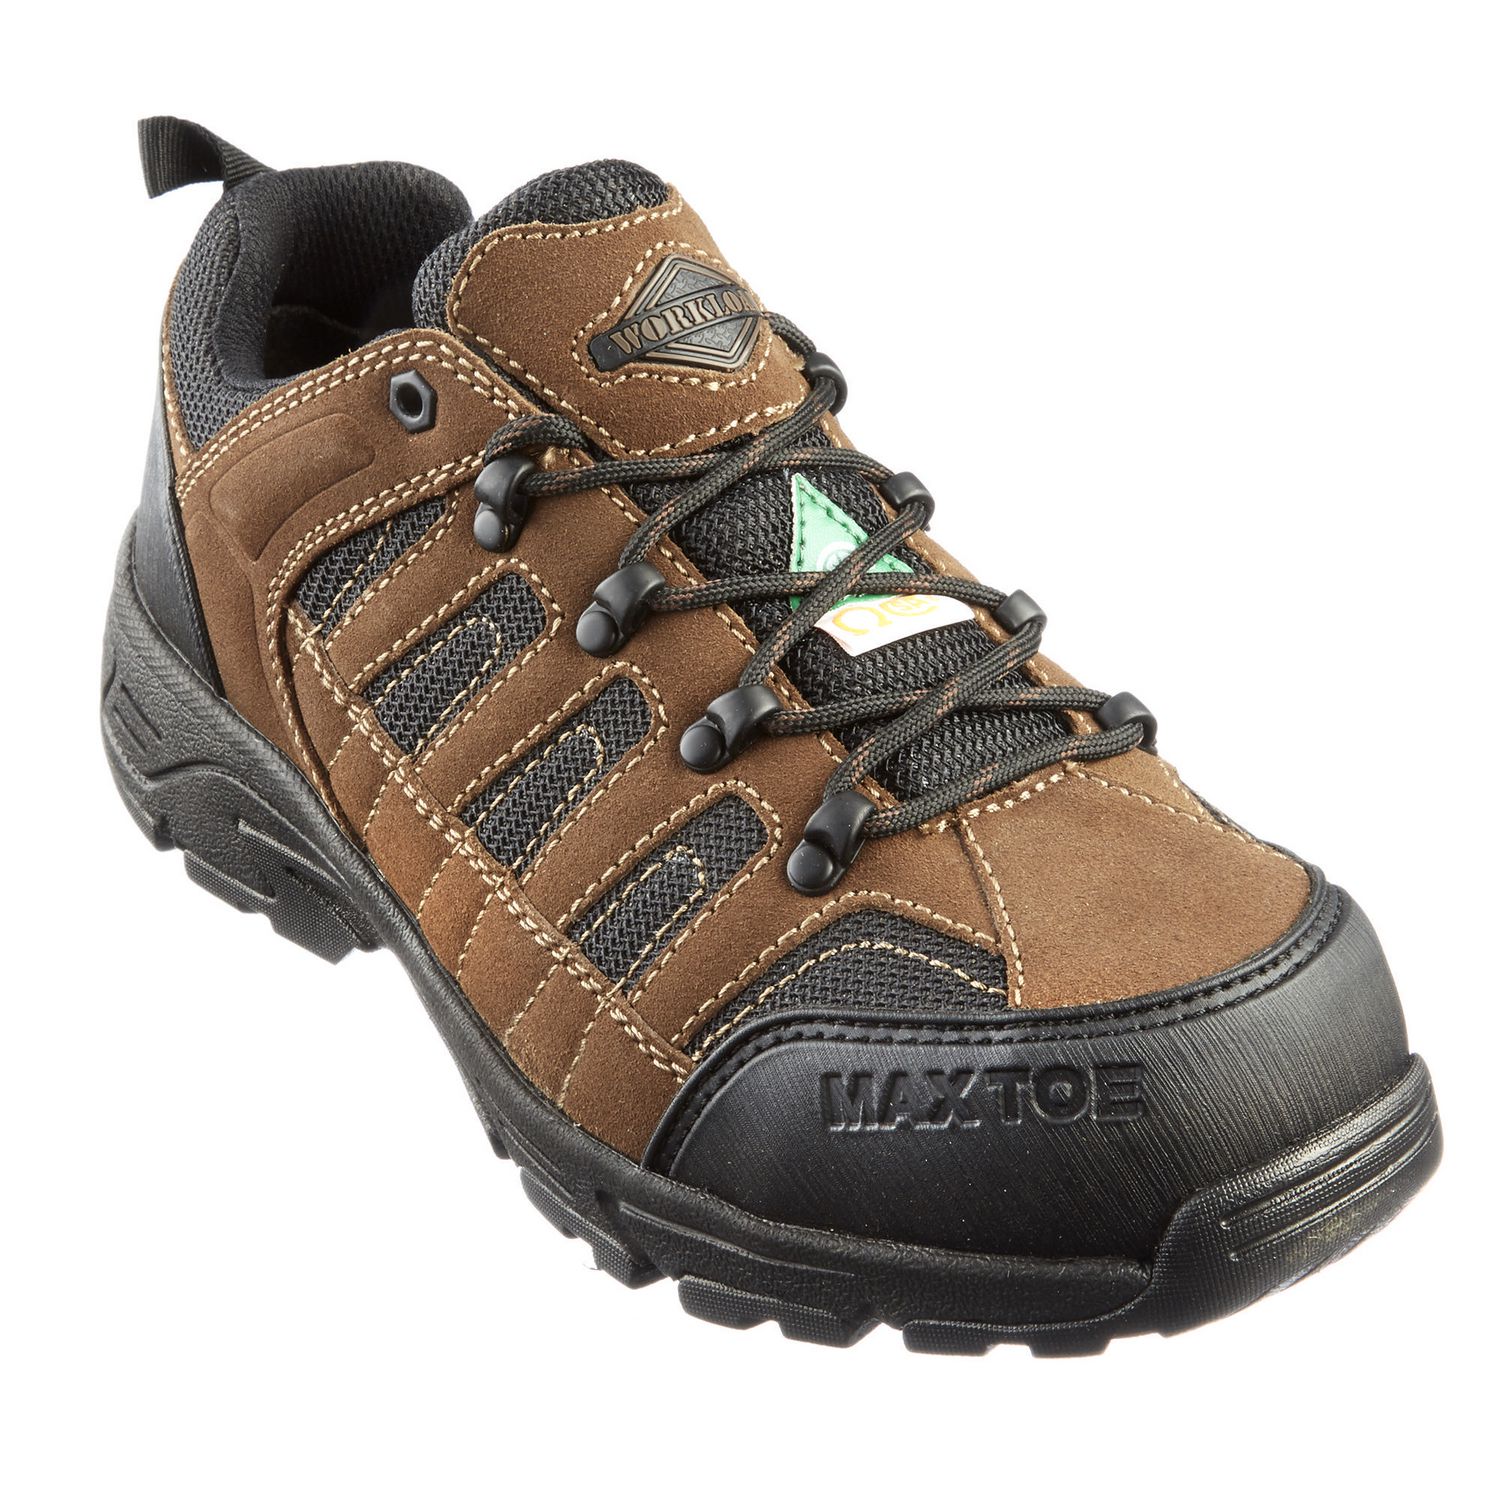 marks warehouse safety shoes